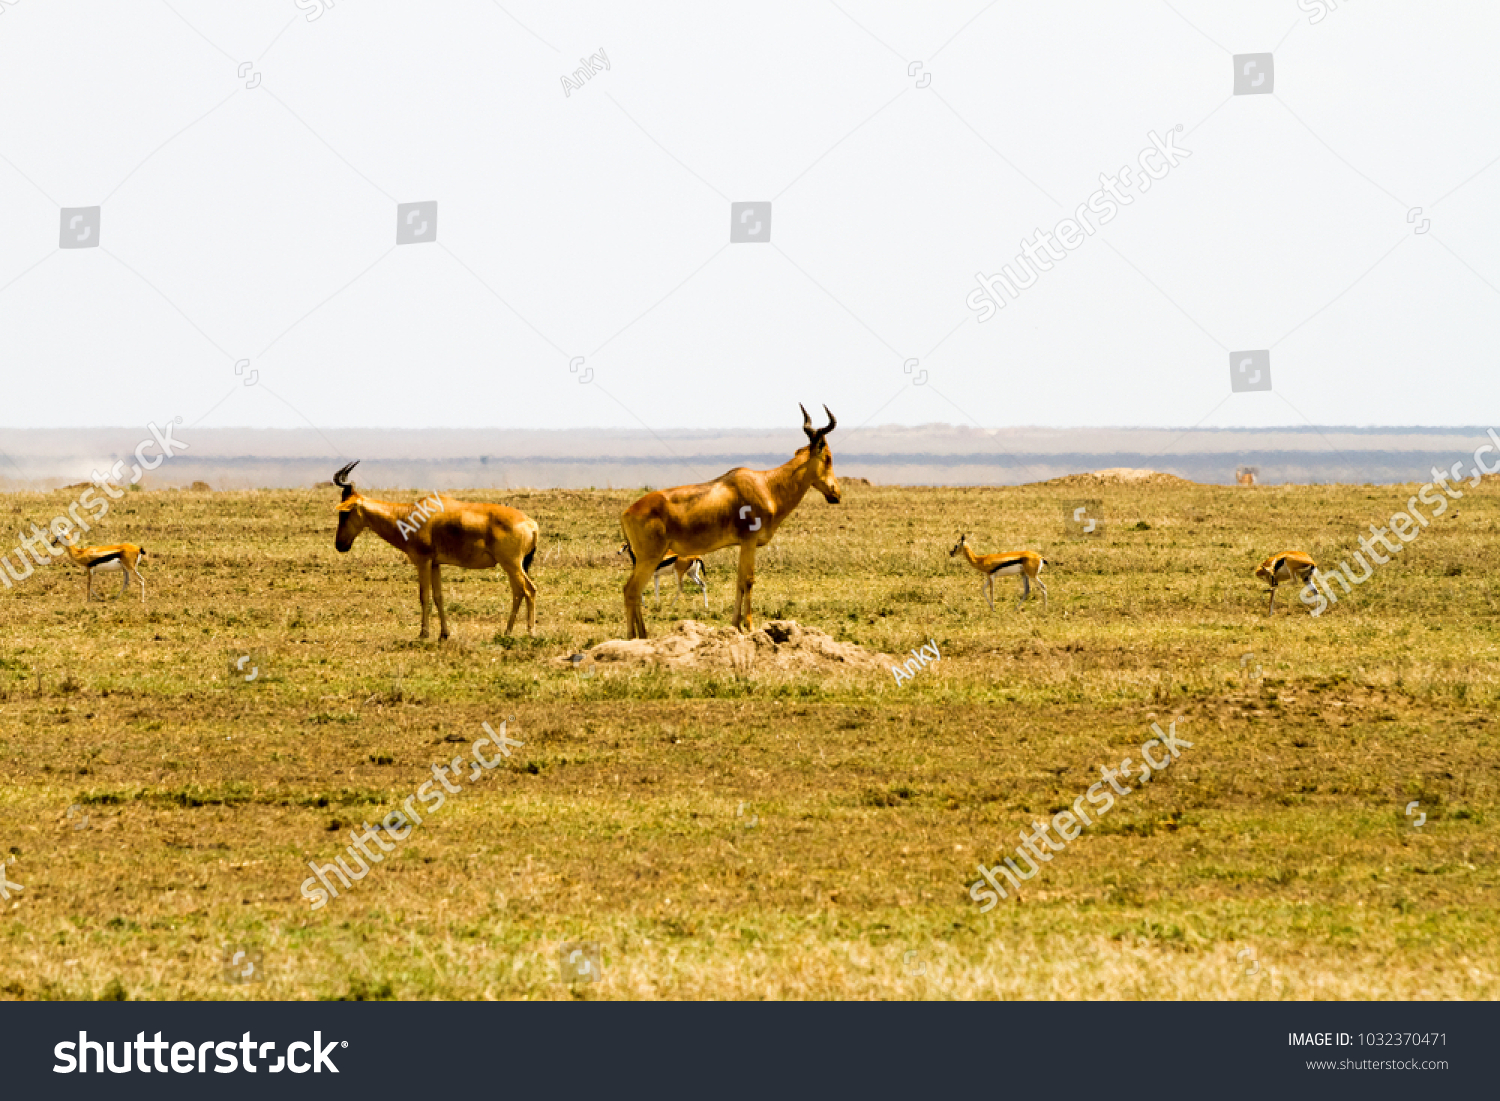 African antelope - the hartebeest (Alcelaphus buselaphus), also known as kongoni in Serengeti National Park, Tanzanian national park in the Serengeti ecosystem in the Mara and Simiyu regions #1032370471